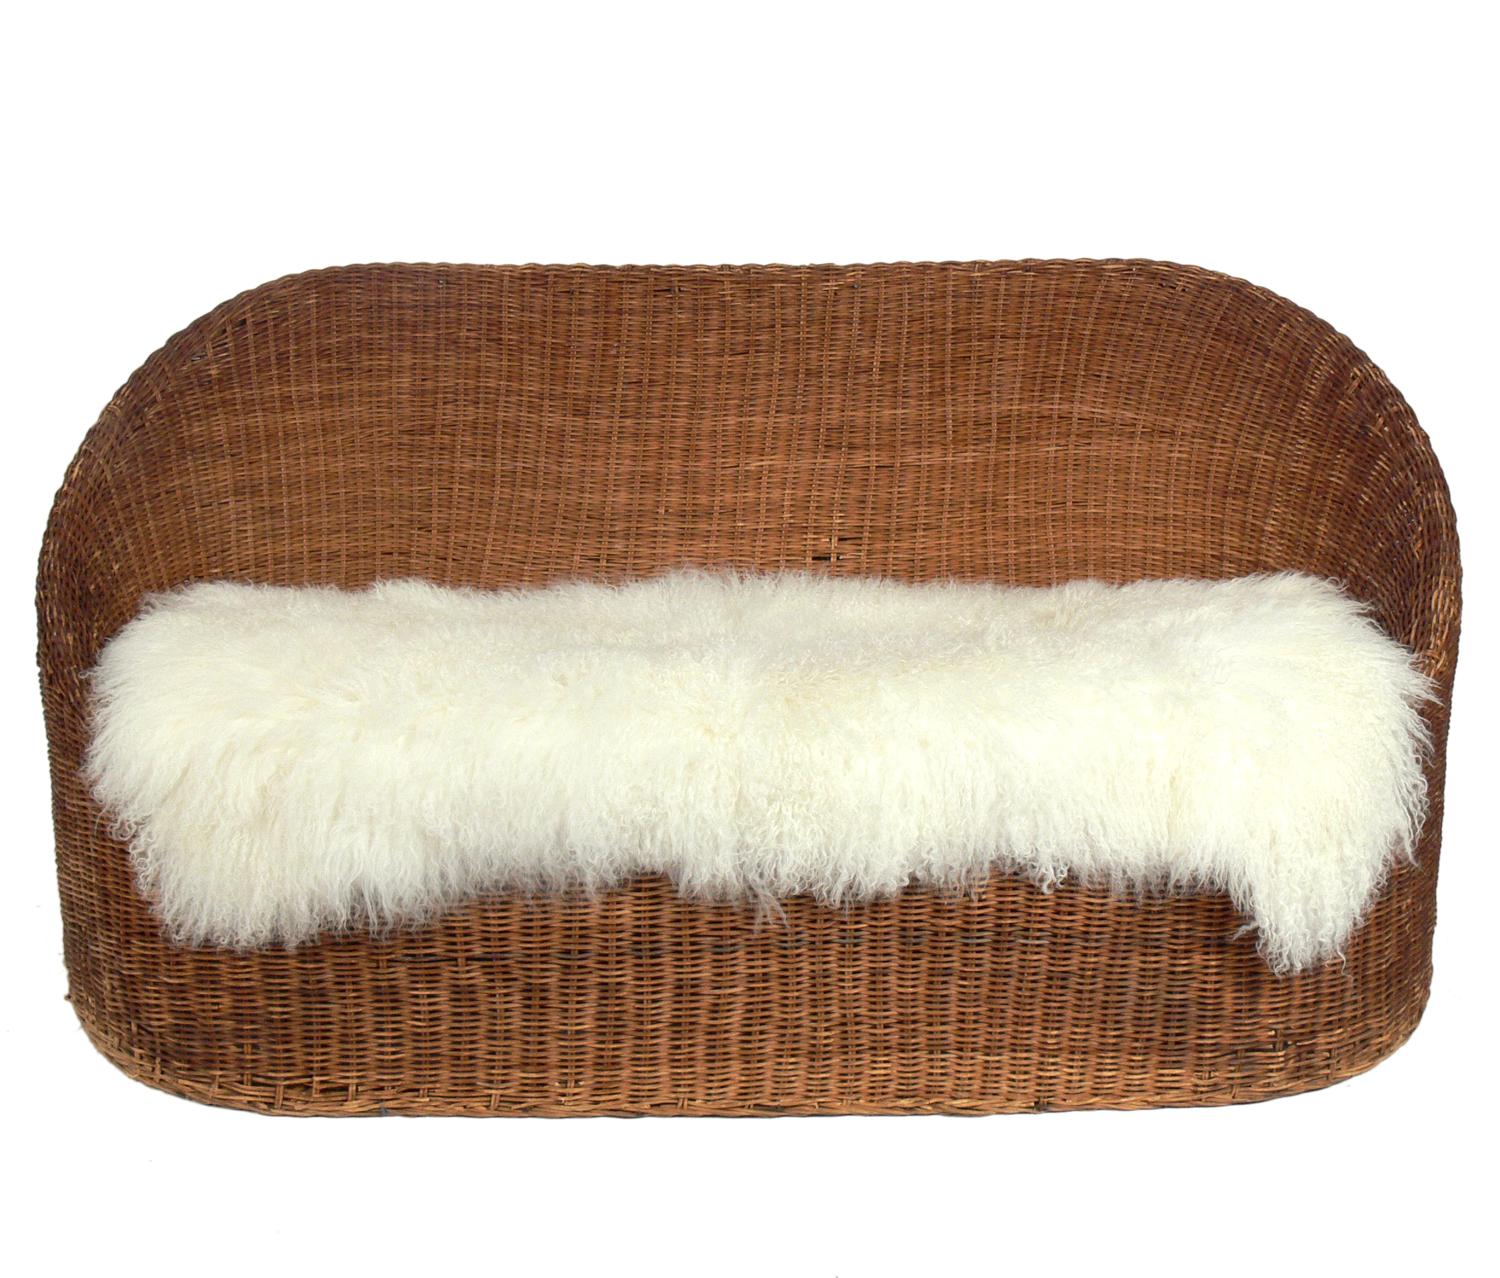 Curvaceous wicker settee, attributed to Isamu Kenmochi, circa 1960s. It has a new cushion in an ivory color herringbone fabric and includes the Mongolian sheepskin throw. The wicker retains it's warm original patina.